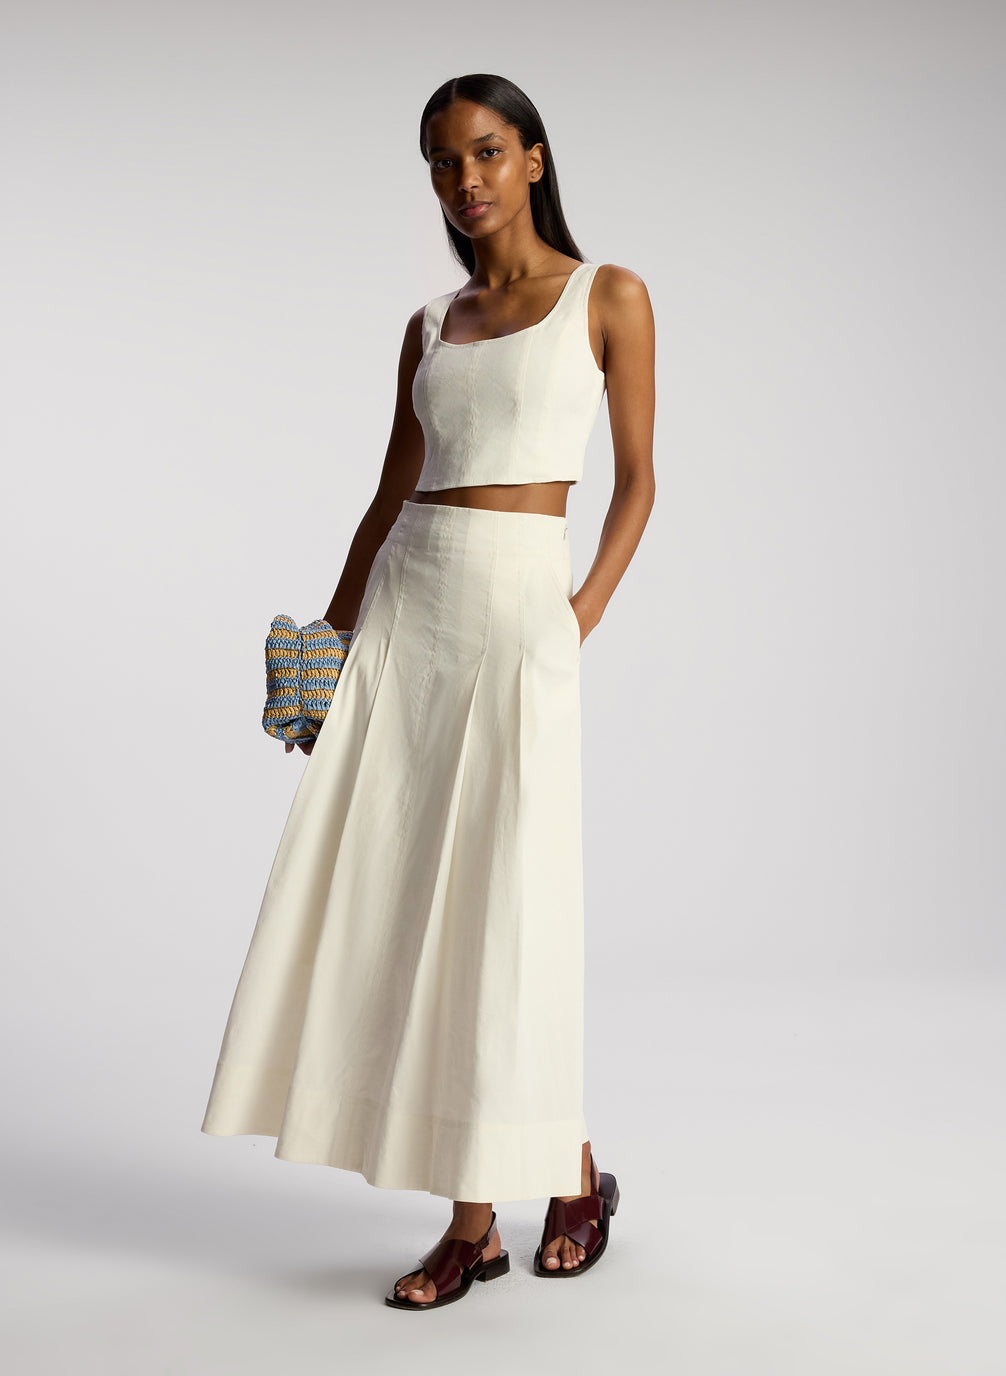 side view of woman wearing white sleeveless cropped top and white midi skirt